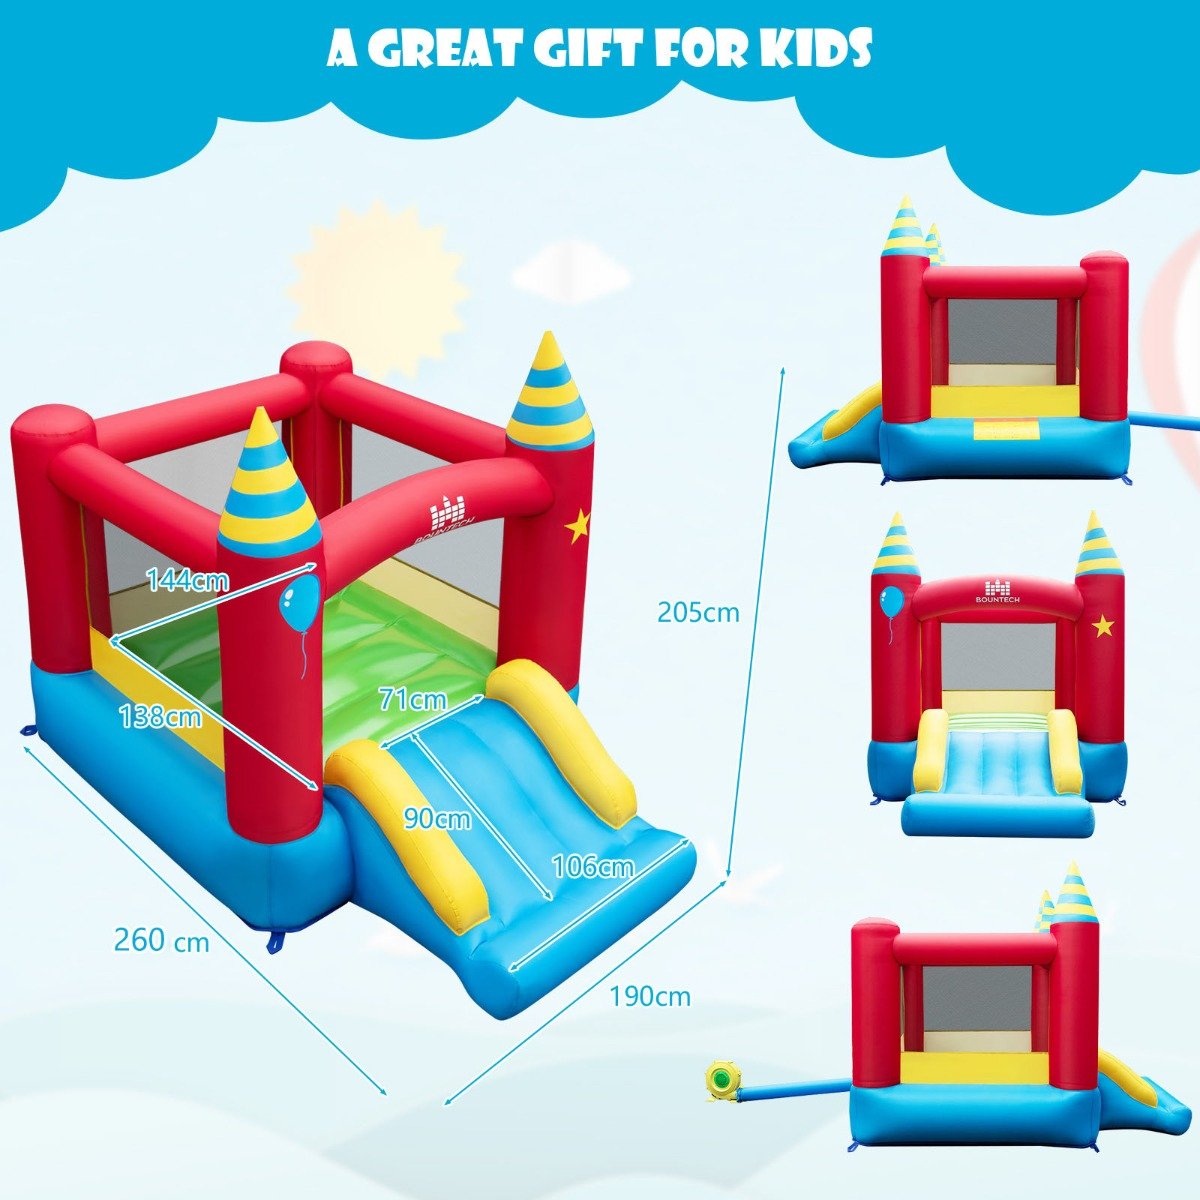 2-in-1 Inflatable Bounce House with Slide & Carrying Bag (without Blower)